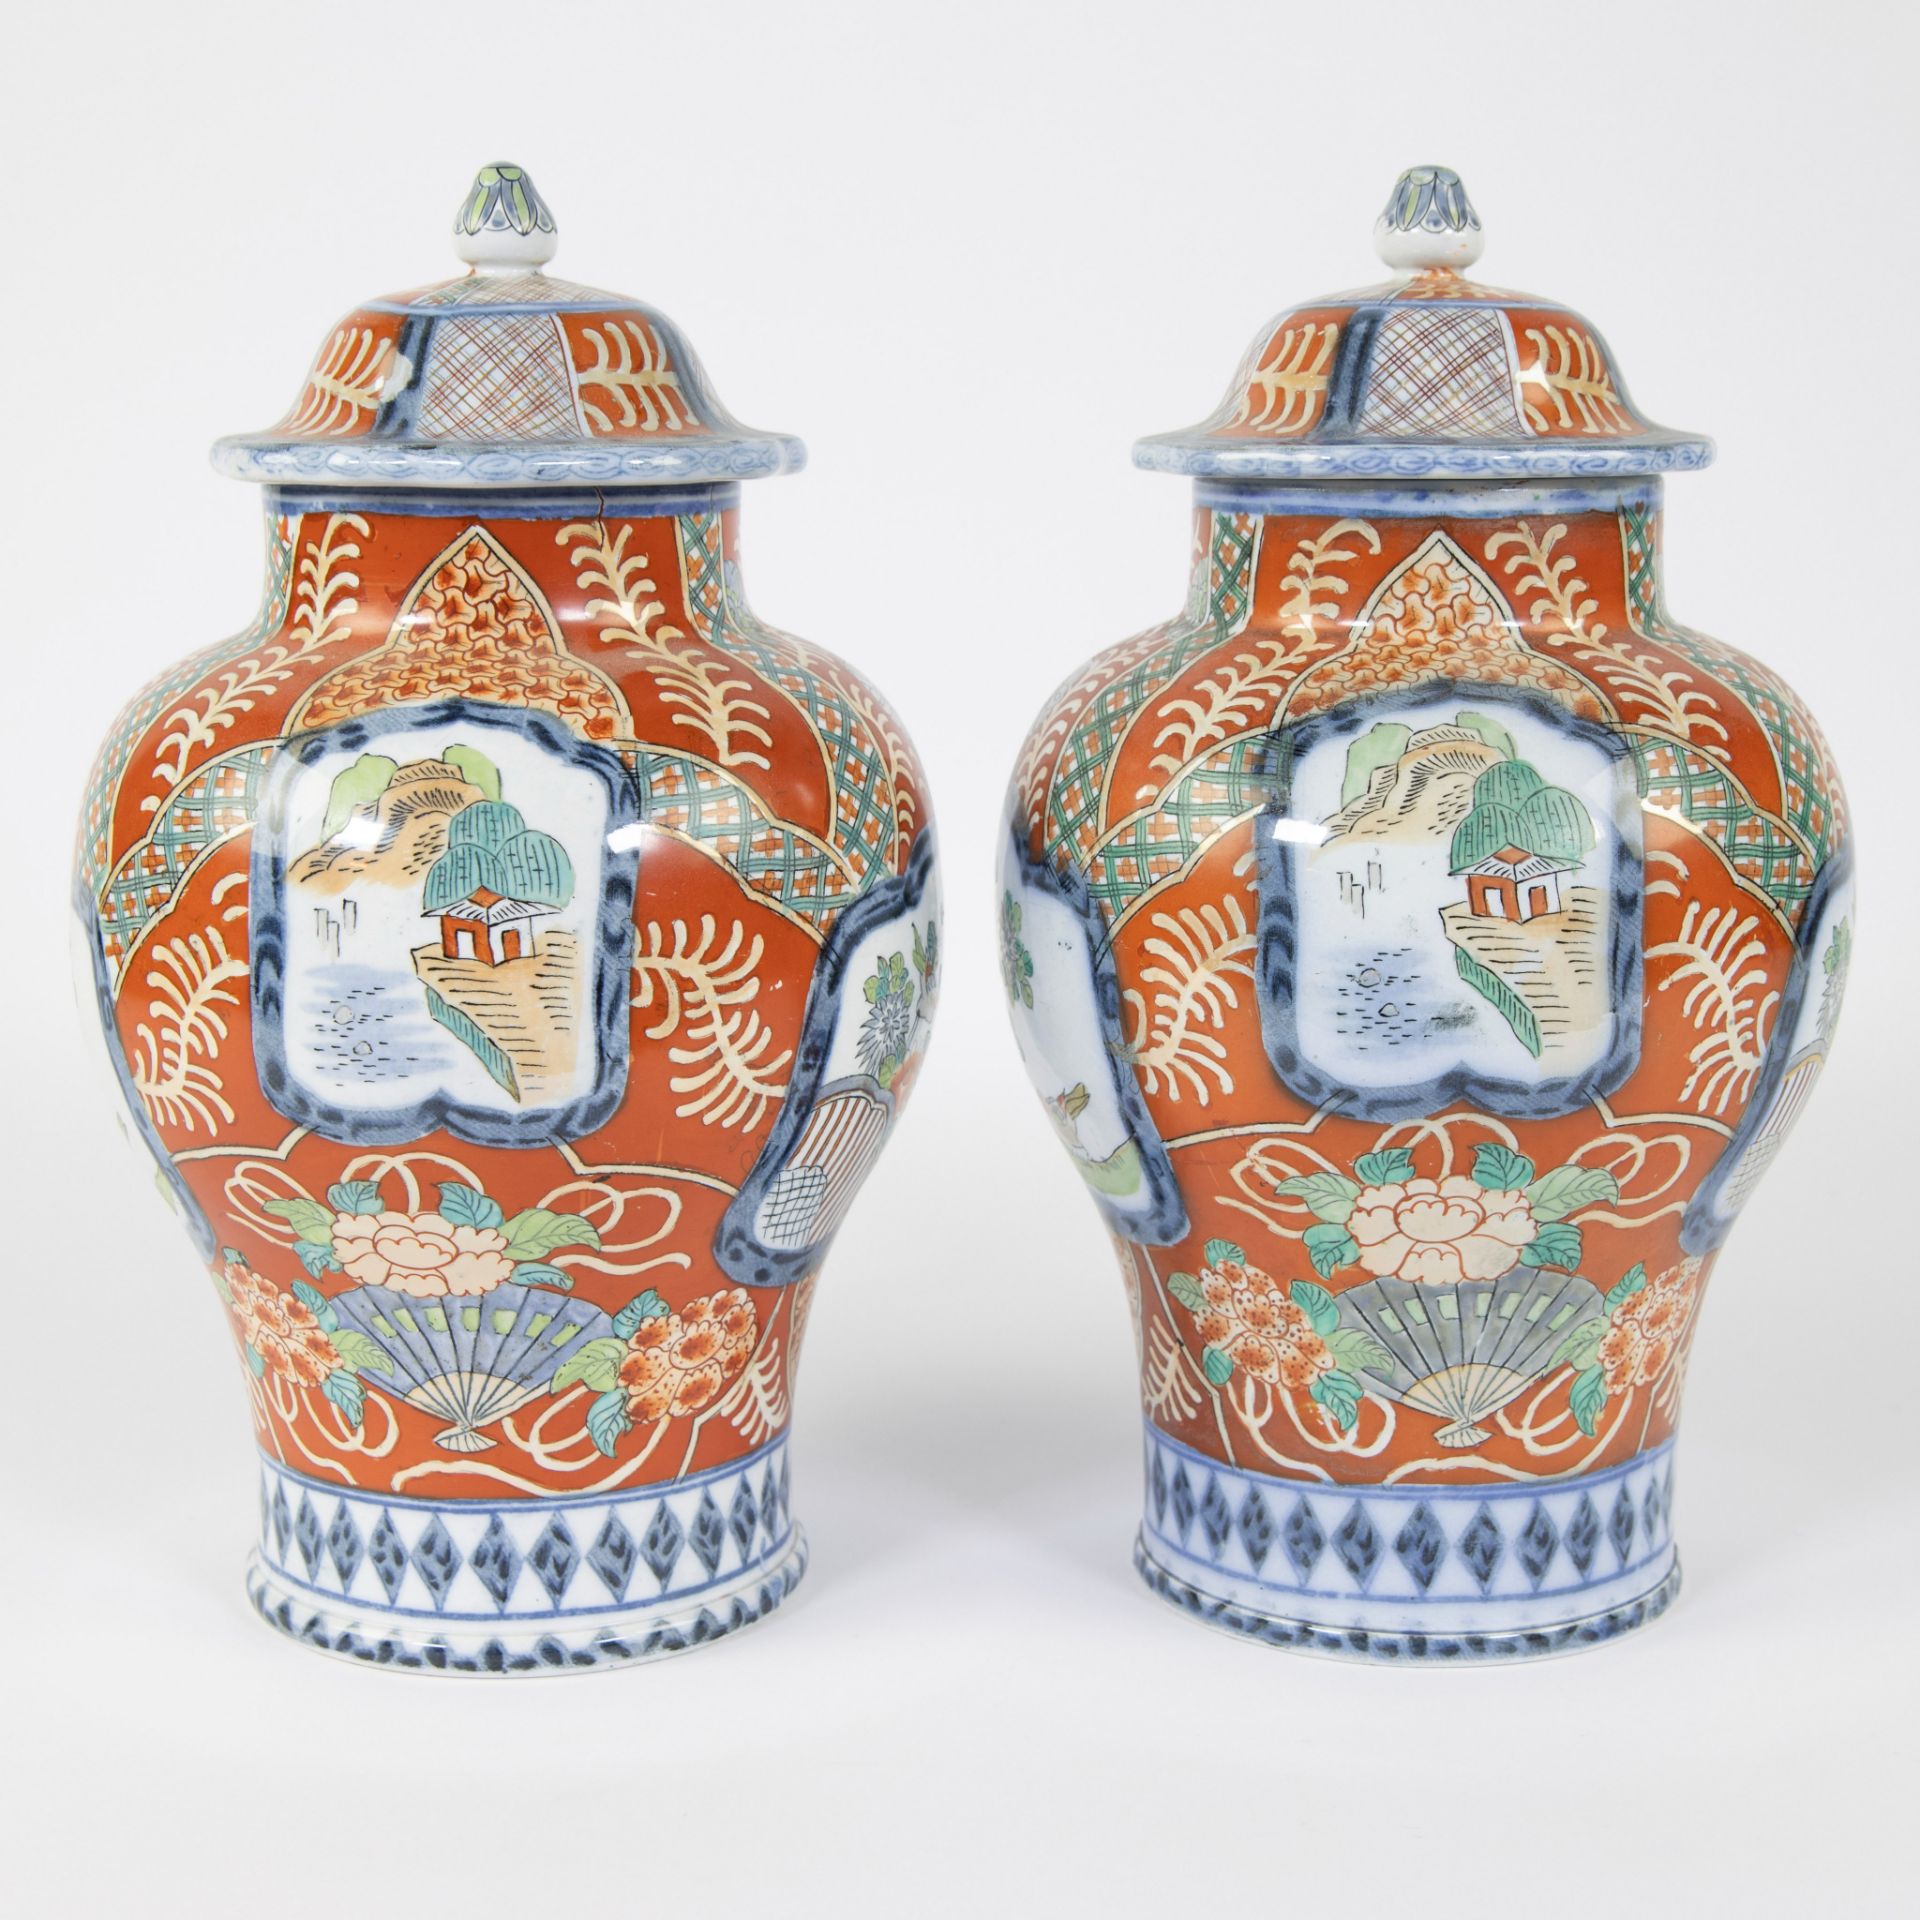 Pair of lidded vases P. Regout & Co, Maastricht, marked - Image 2 of 7